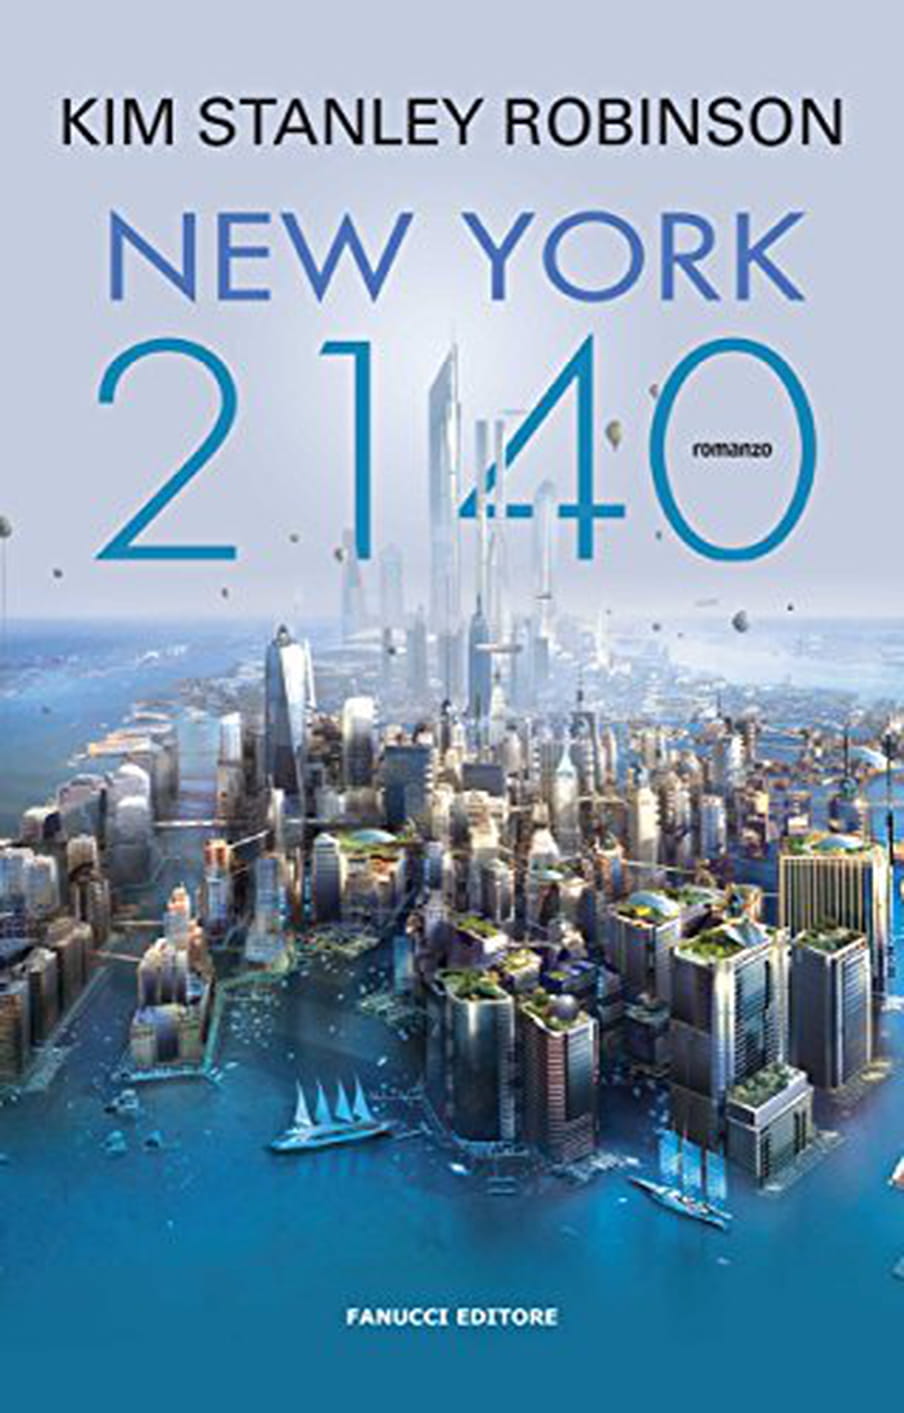 Book cover of New York 2140, depicting an illustration of New York from above